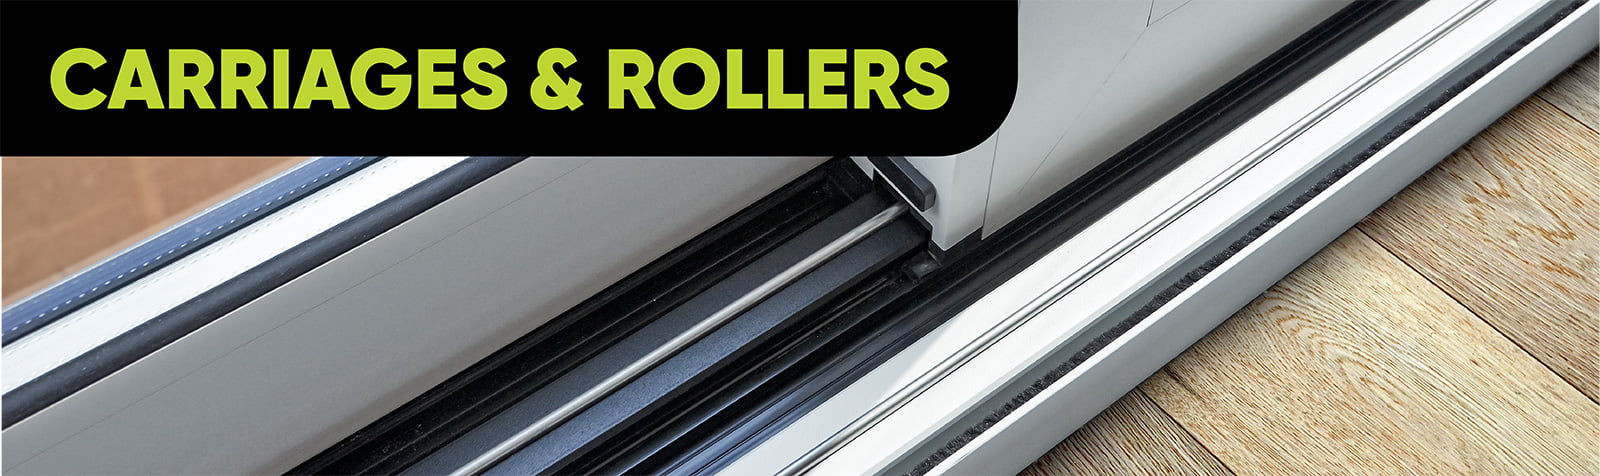 Door Hardware Carriage Rollers Category Banner